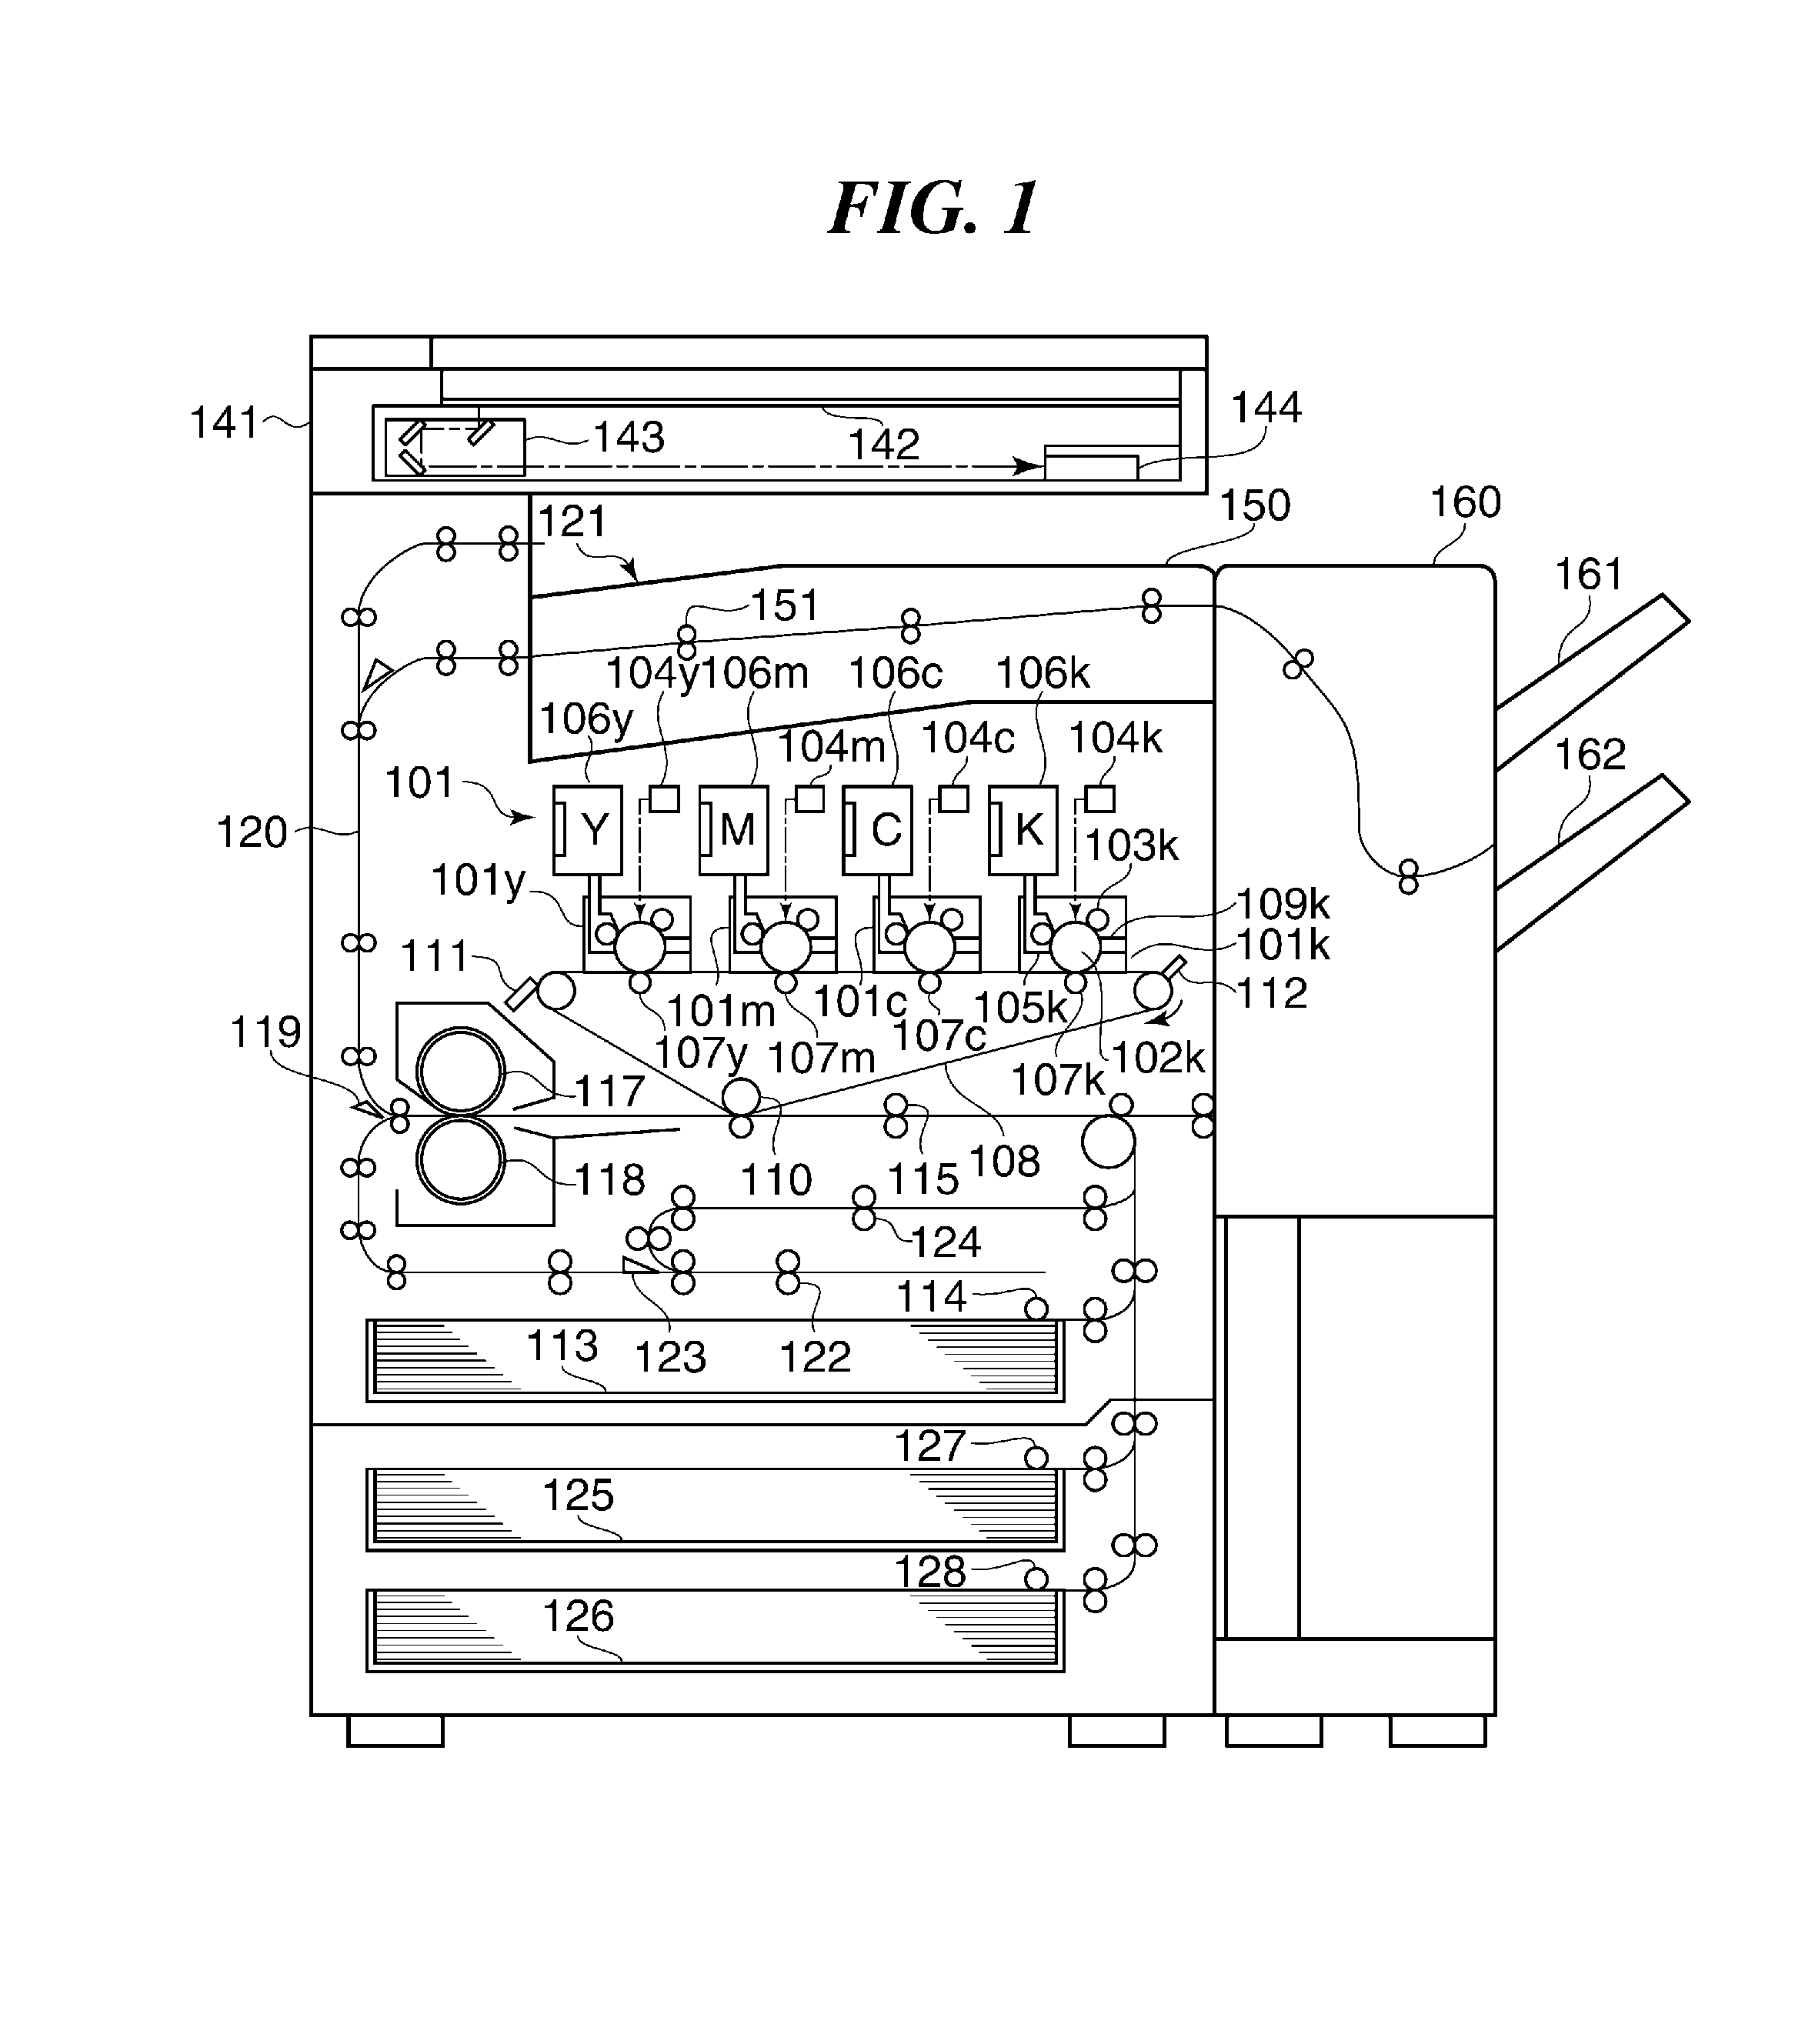 Image forming apparatus capable of updating control program, and storage medium